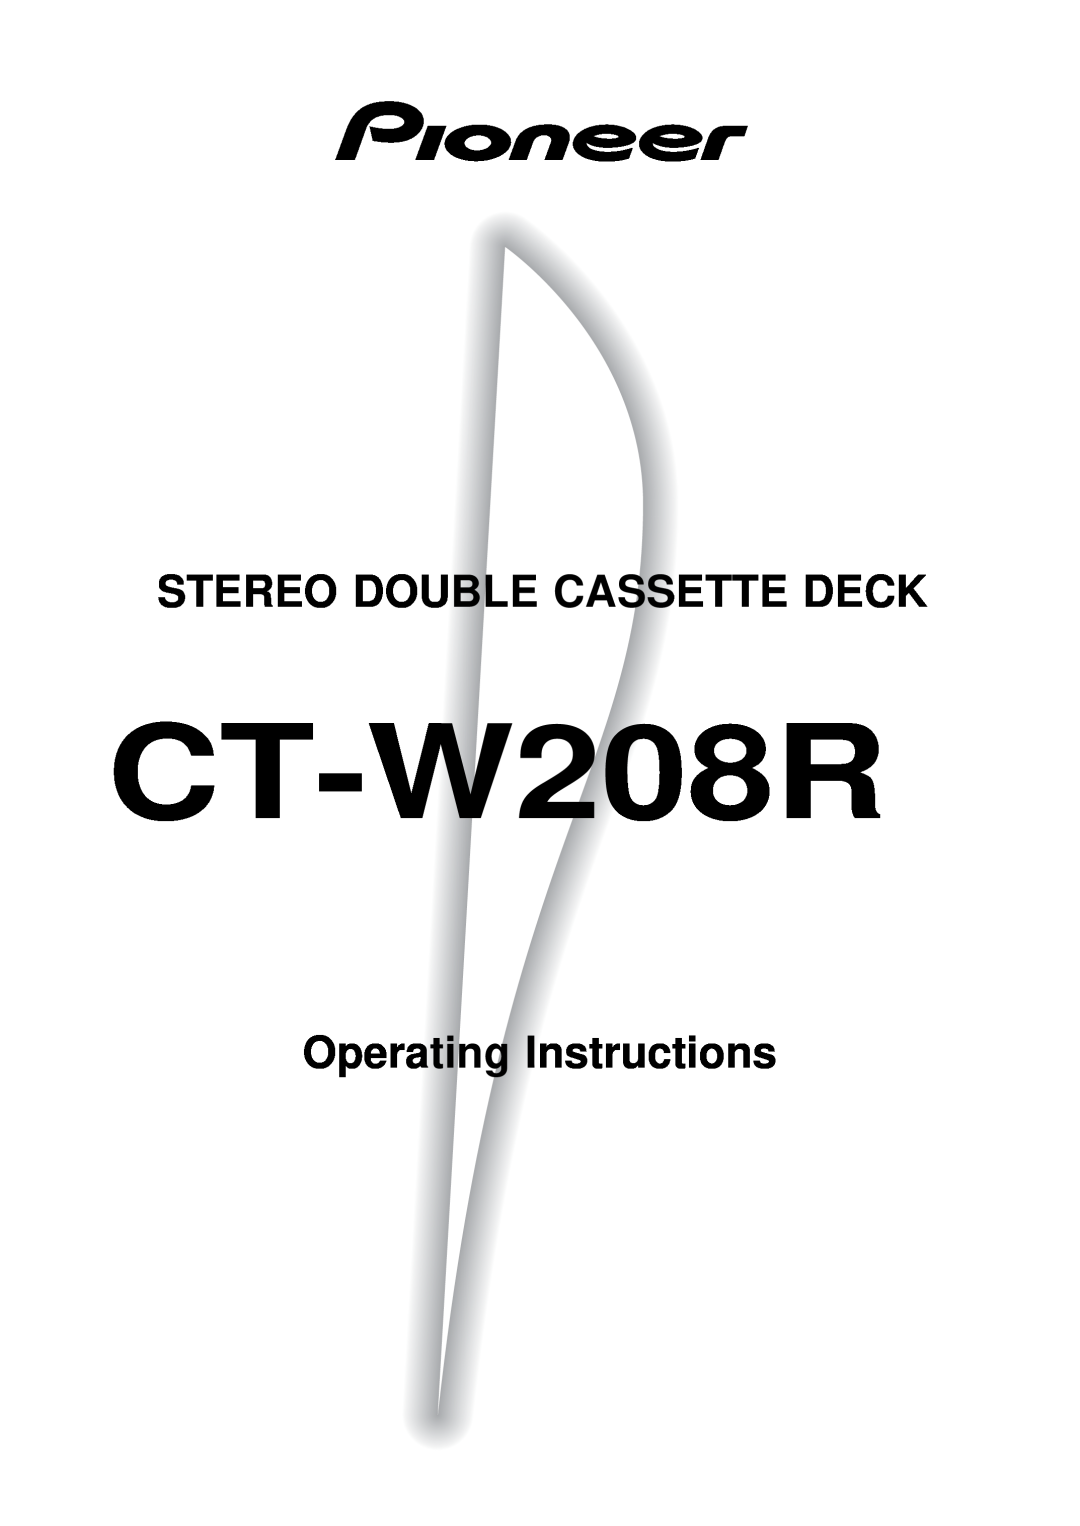 Pioneer CT-W208R operating instructions Stereo Double Cassette Deck, Operating Instructions 